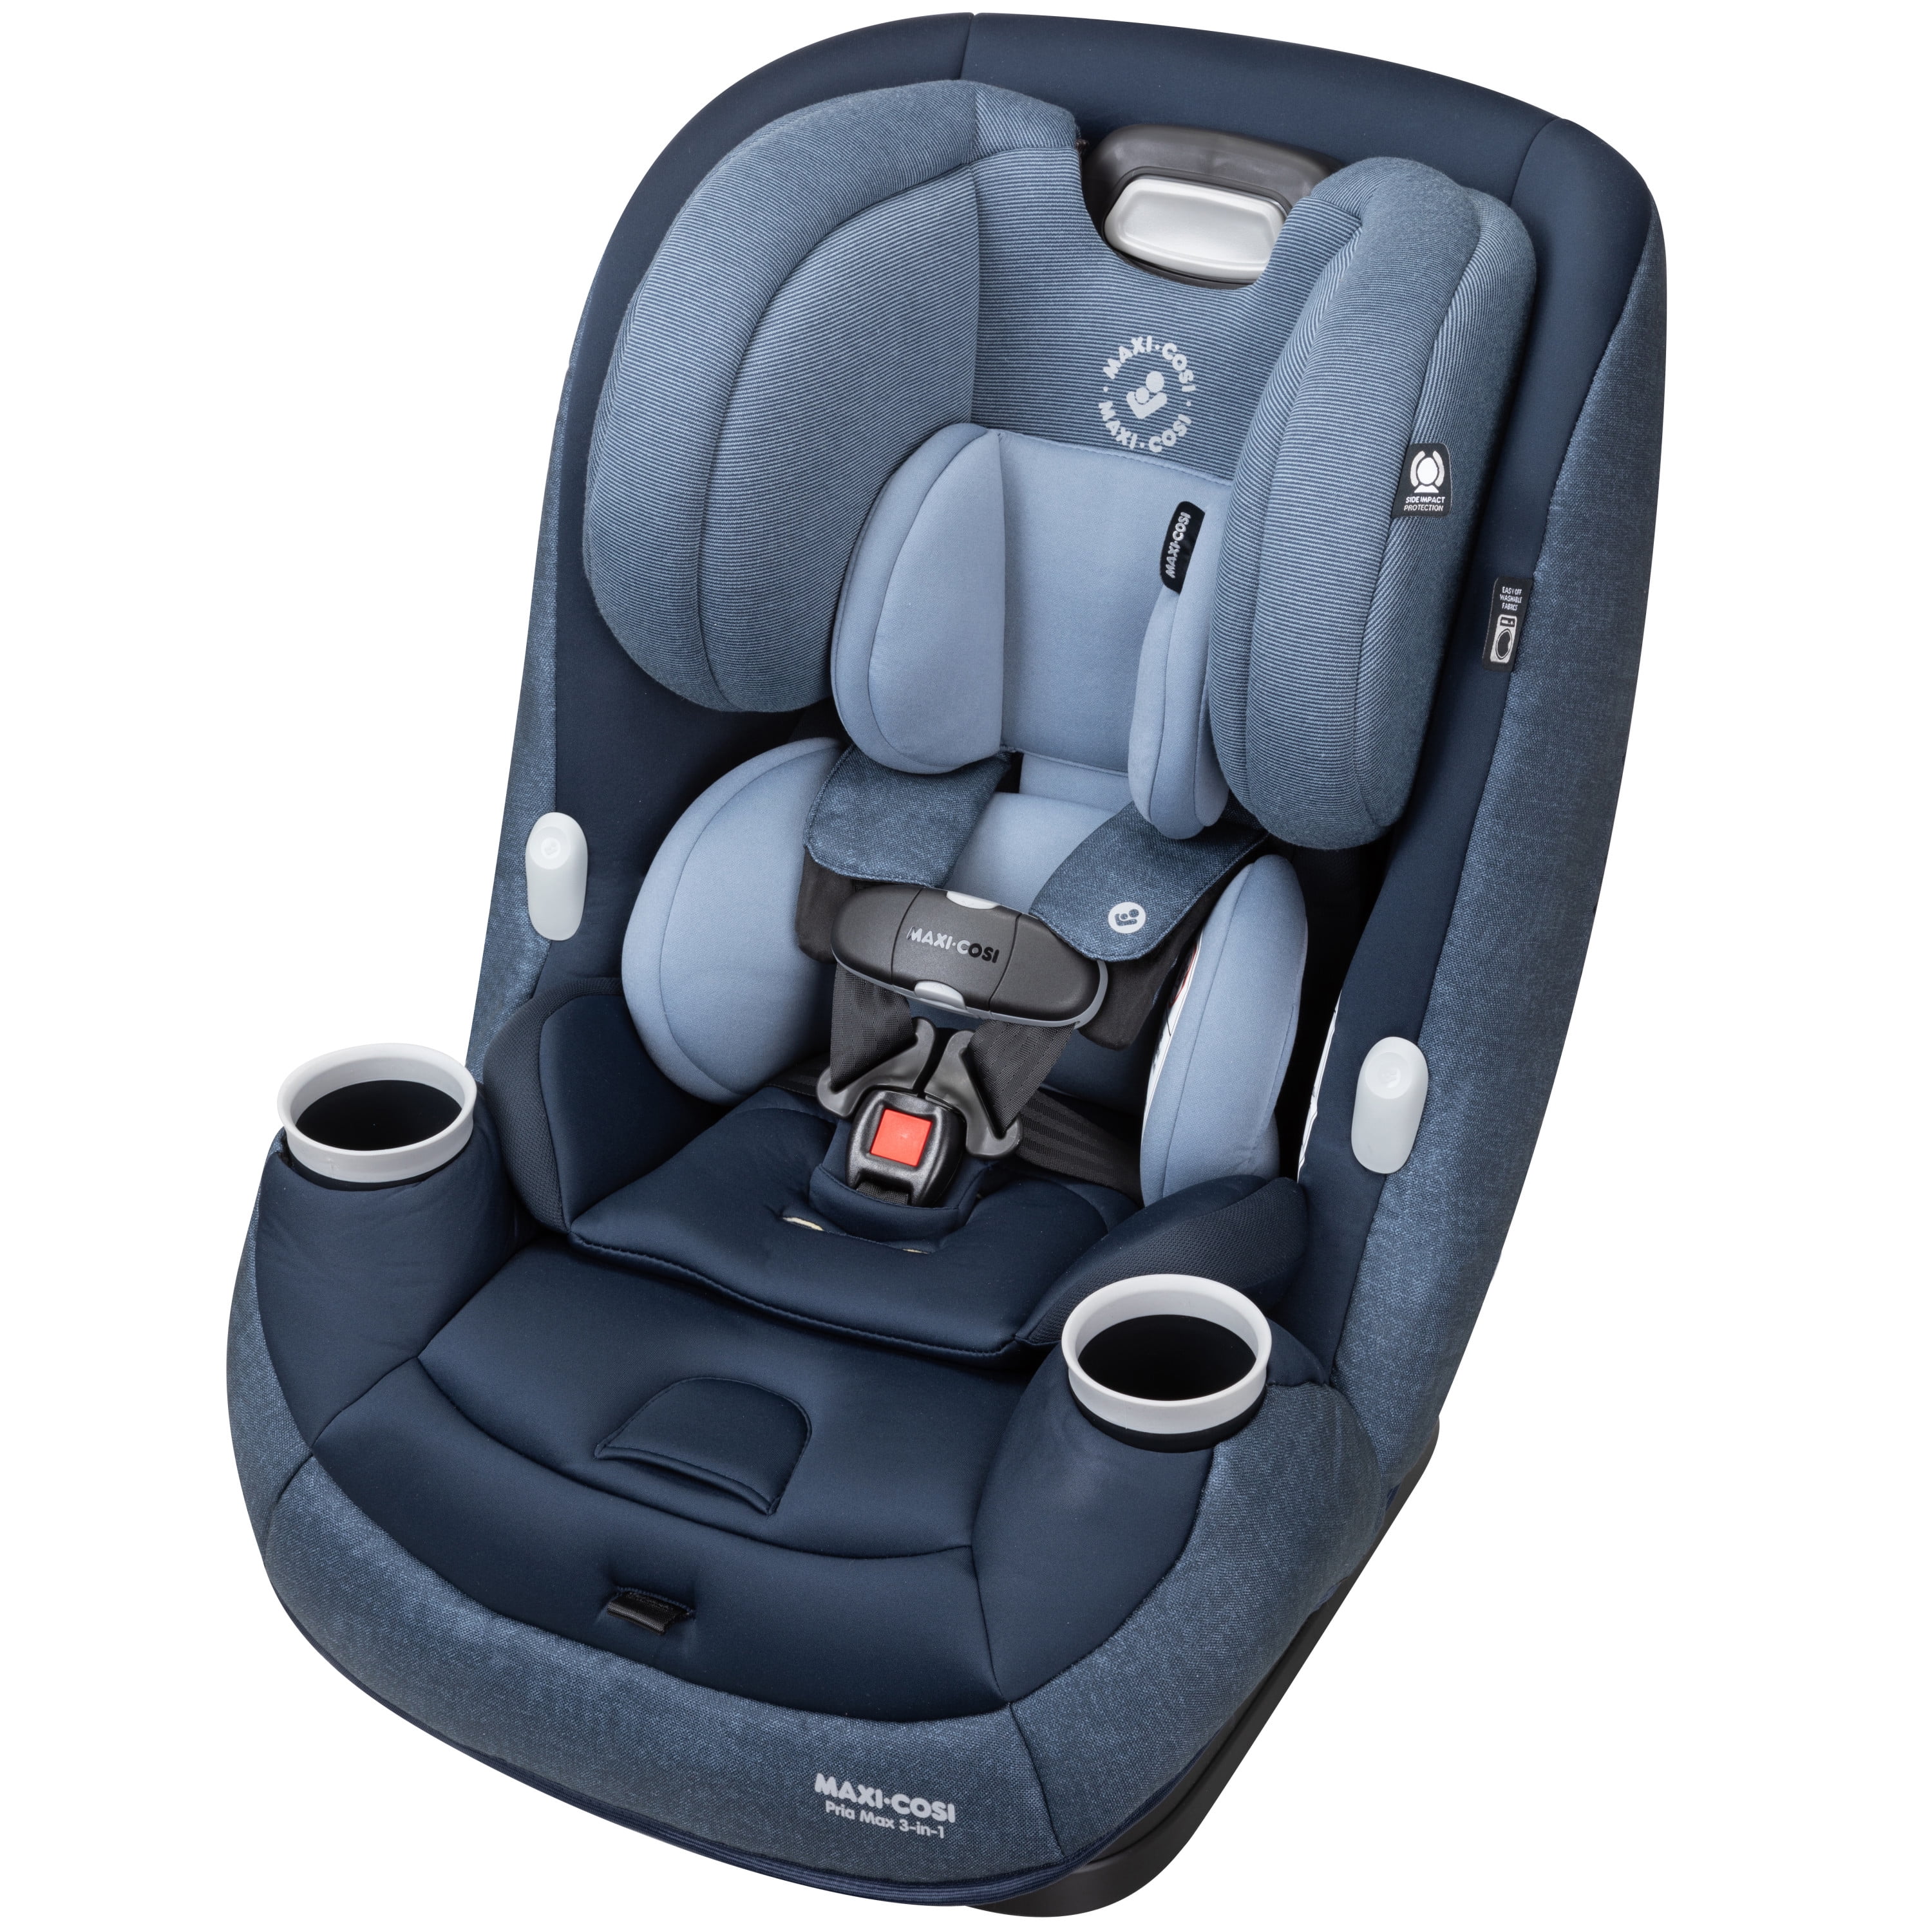 streepje Achtervolging Pogo stick sprong Maxi-Cosi Pria Max All-in-One Convertible Car Seat, Nomad Blue - Walmart.com